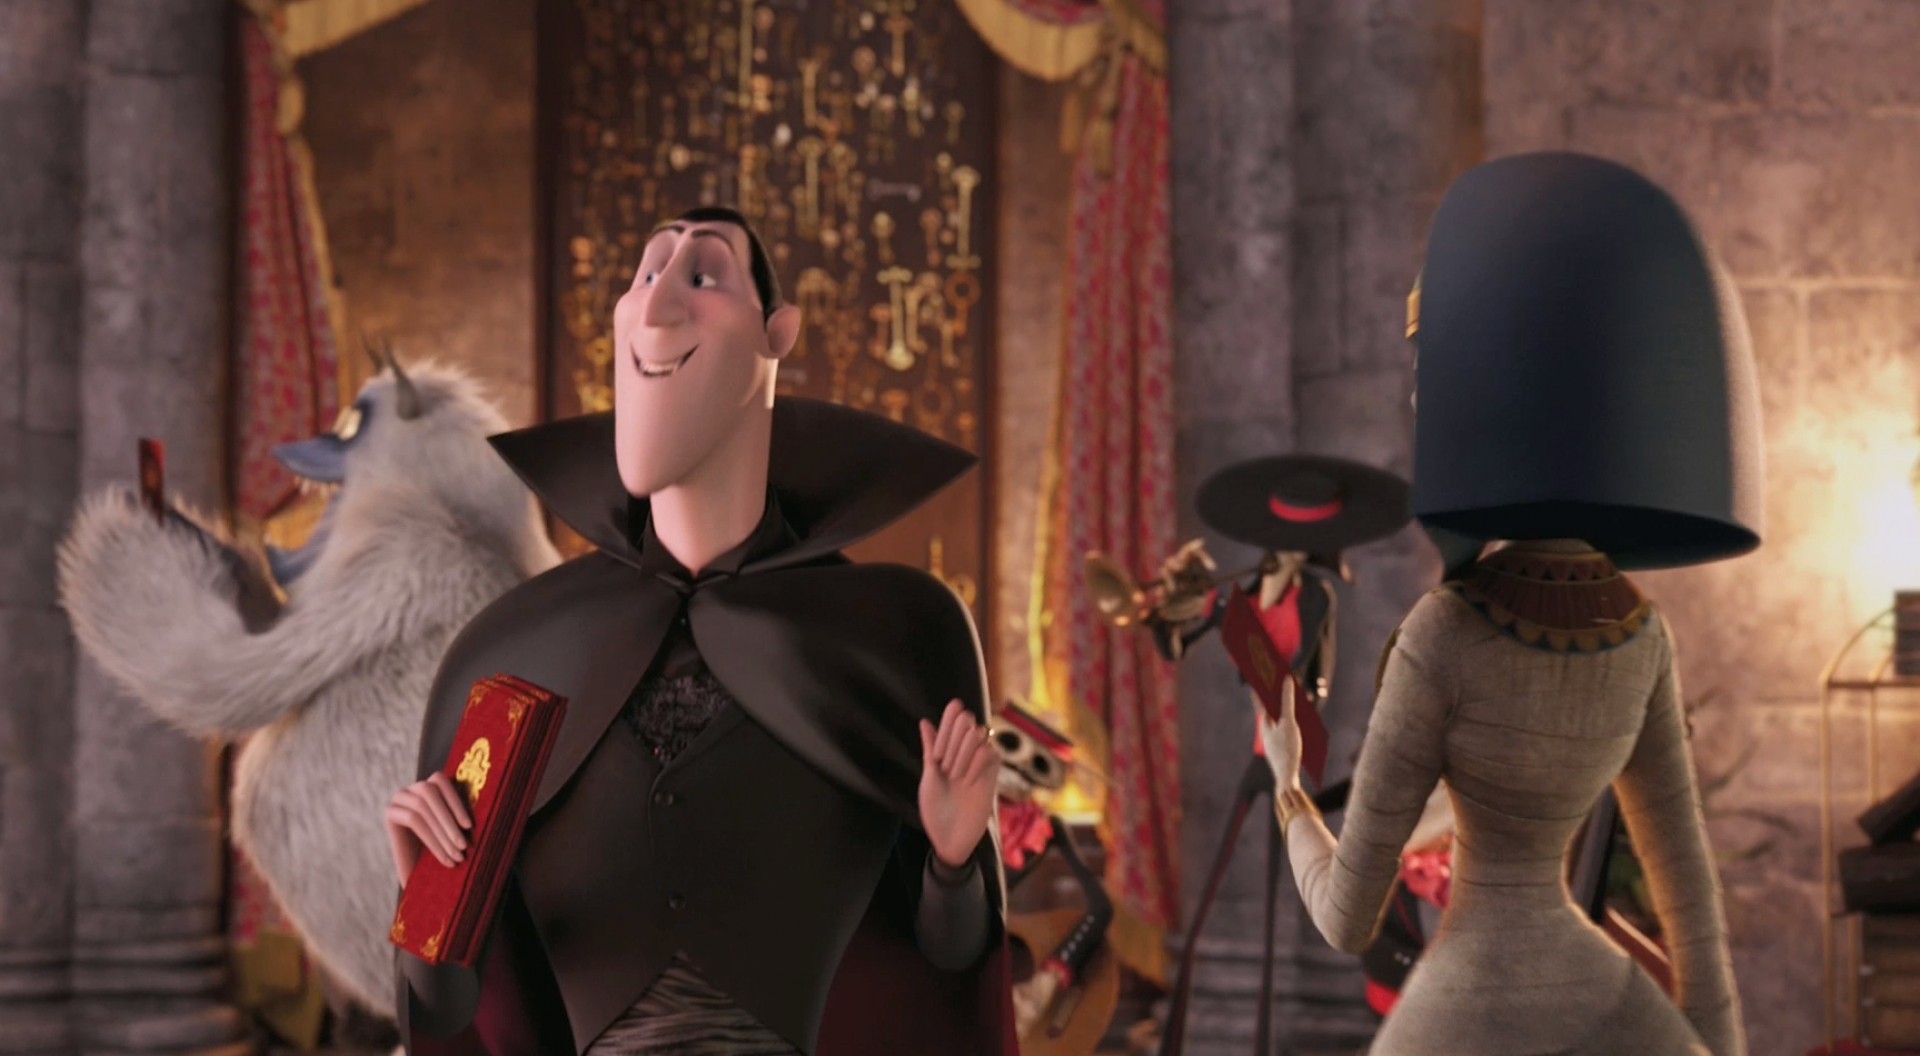 Dracula from Columbia Pictures' Hotel Transylvania (2012)